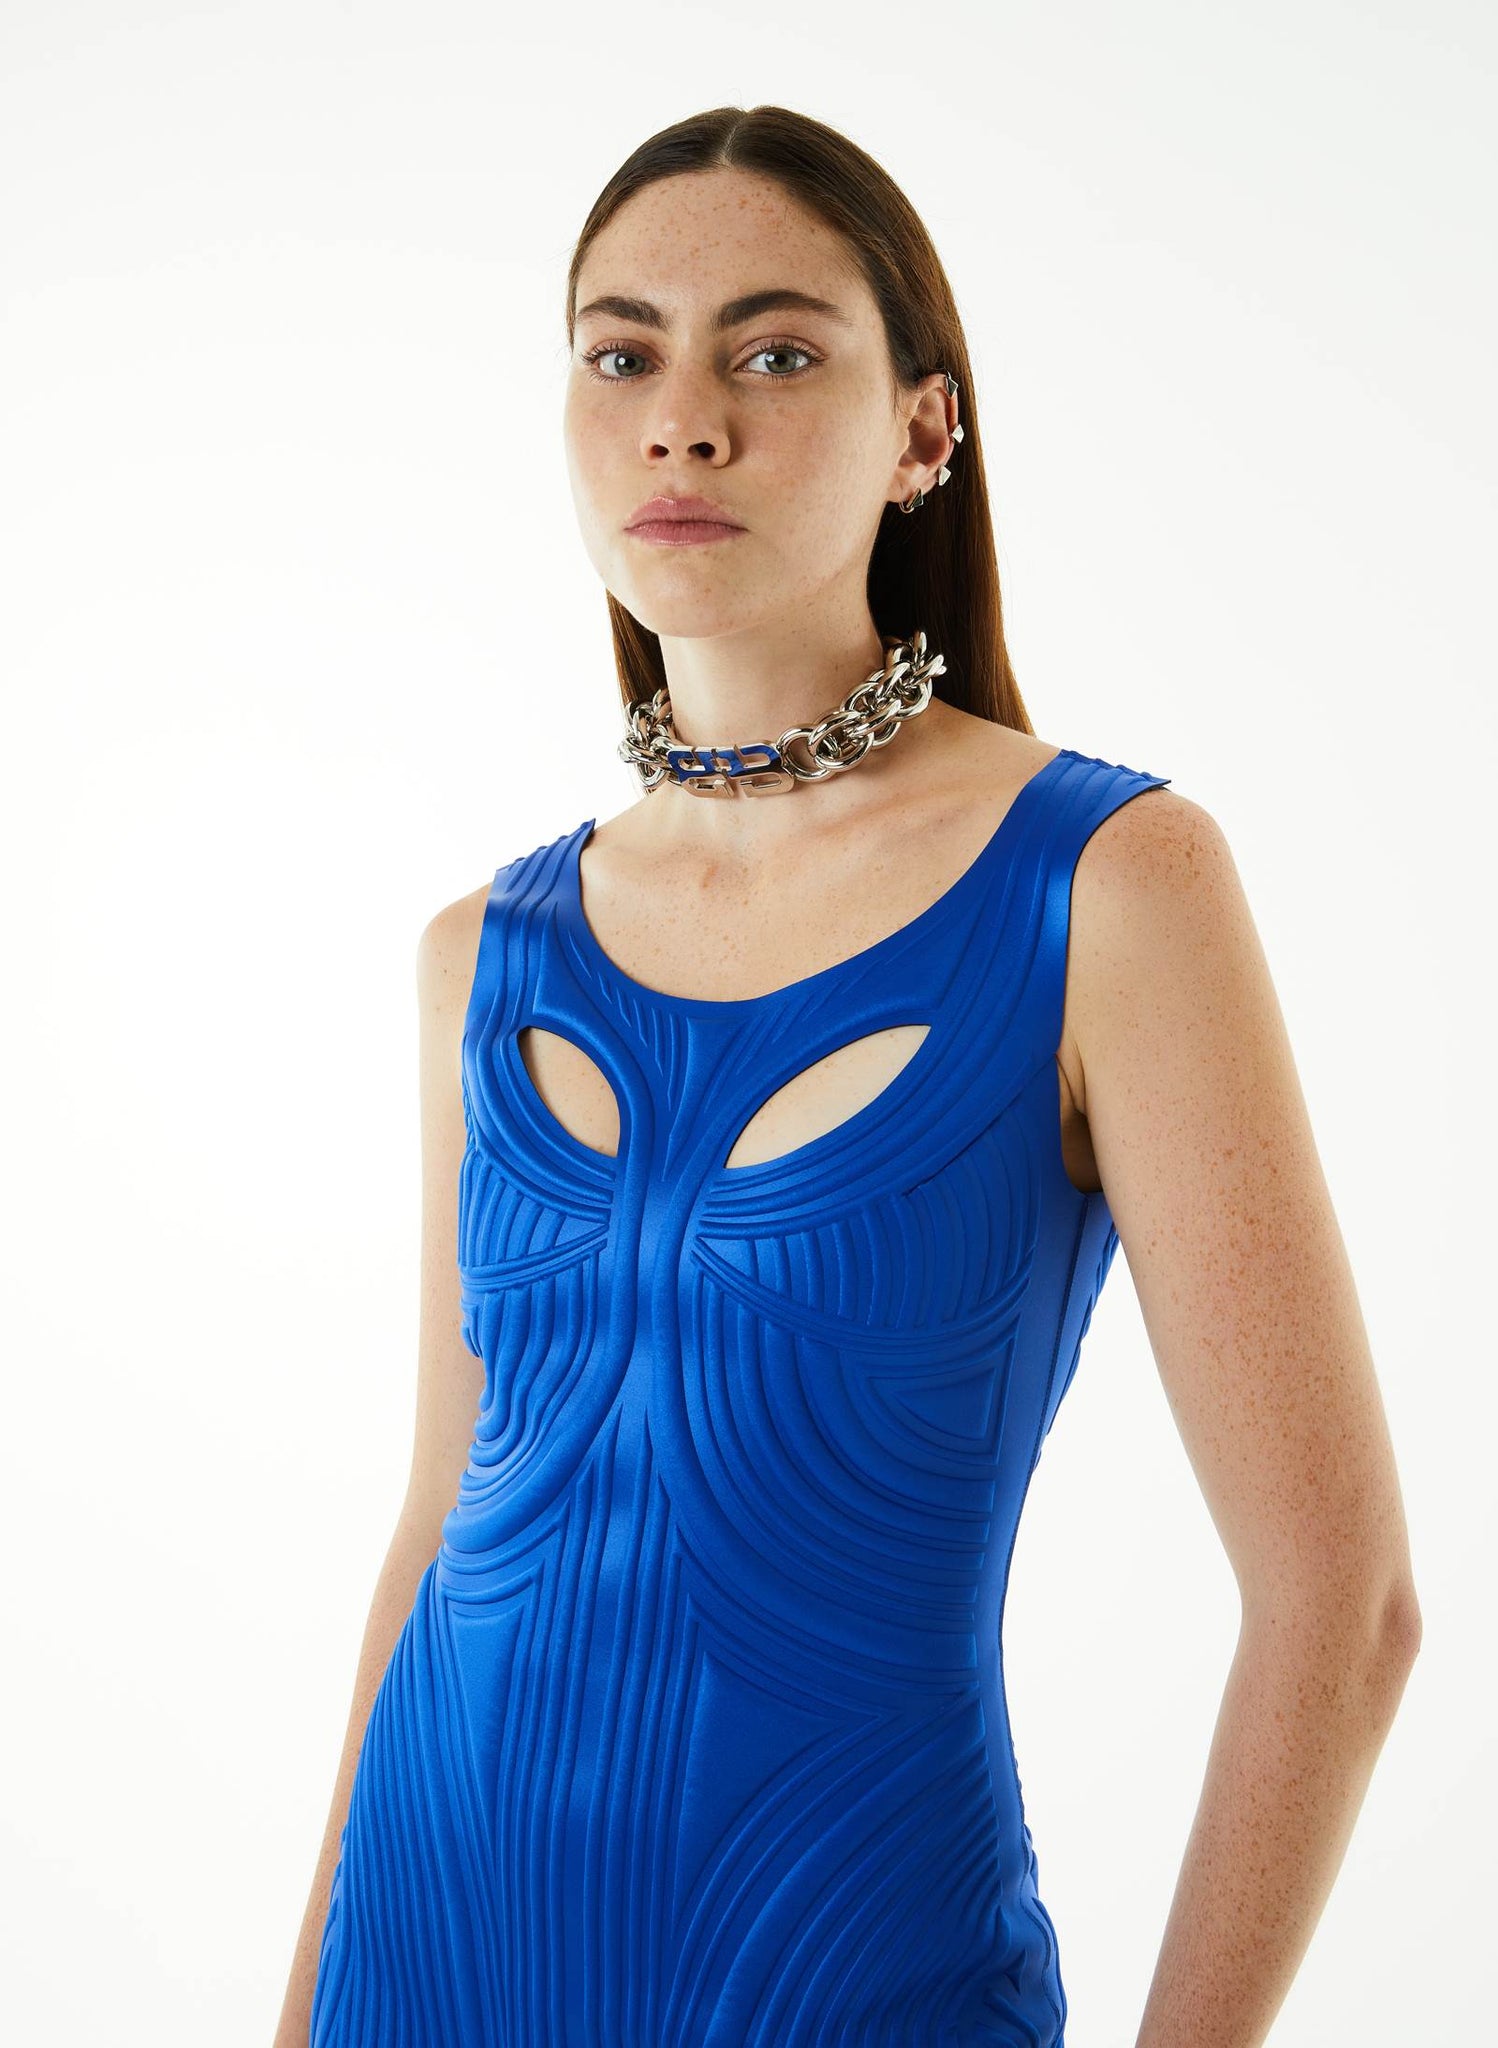 Blue Thermo Impressed Dress